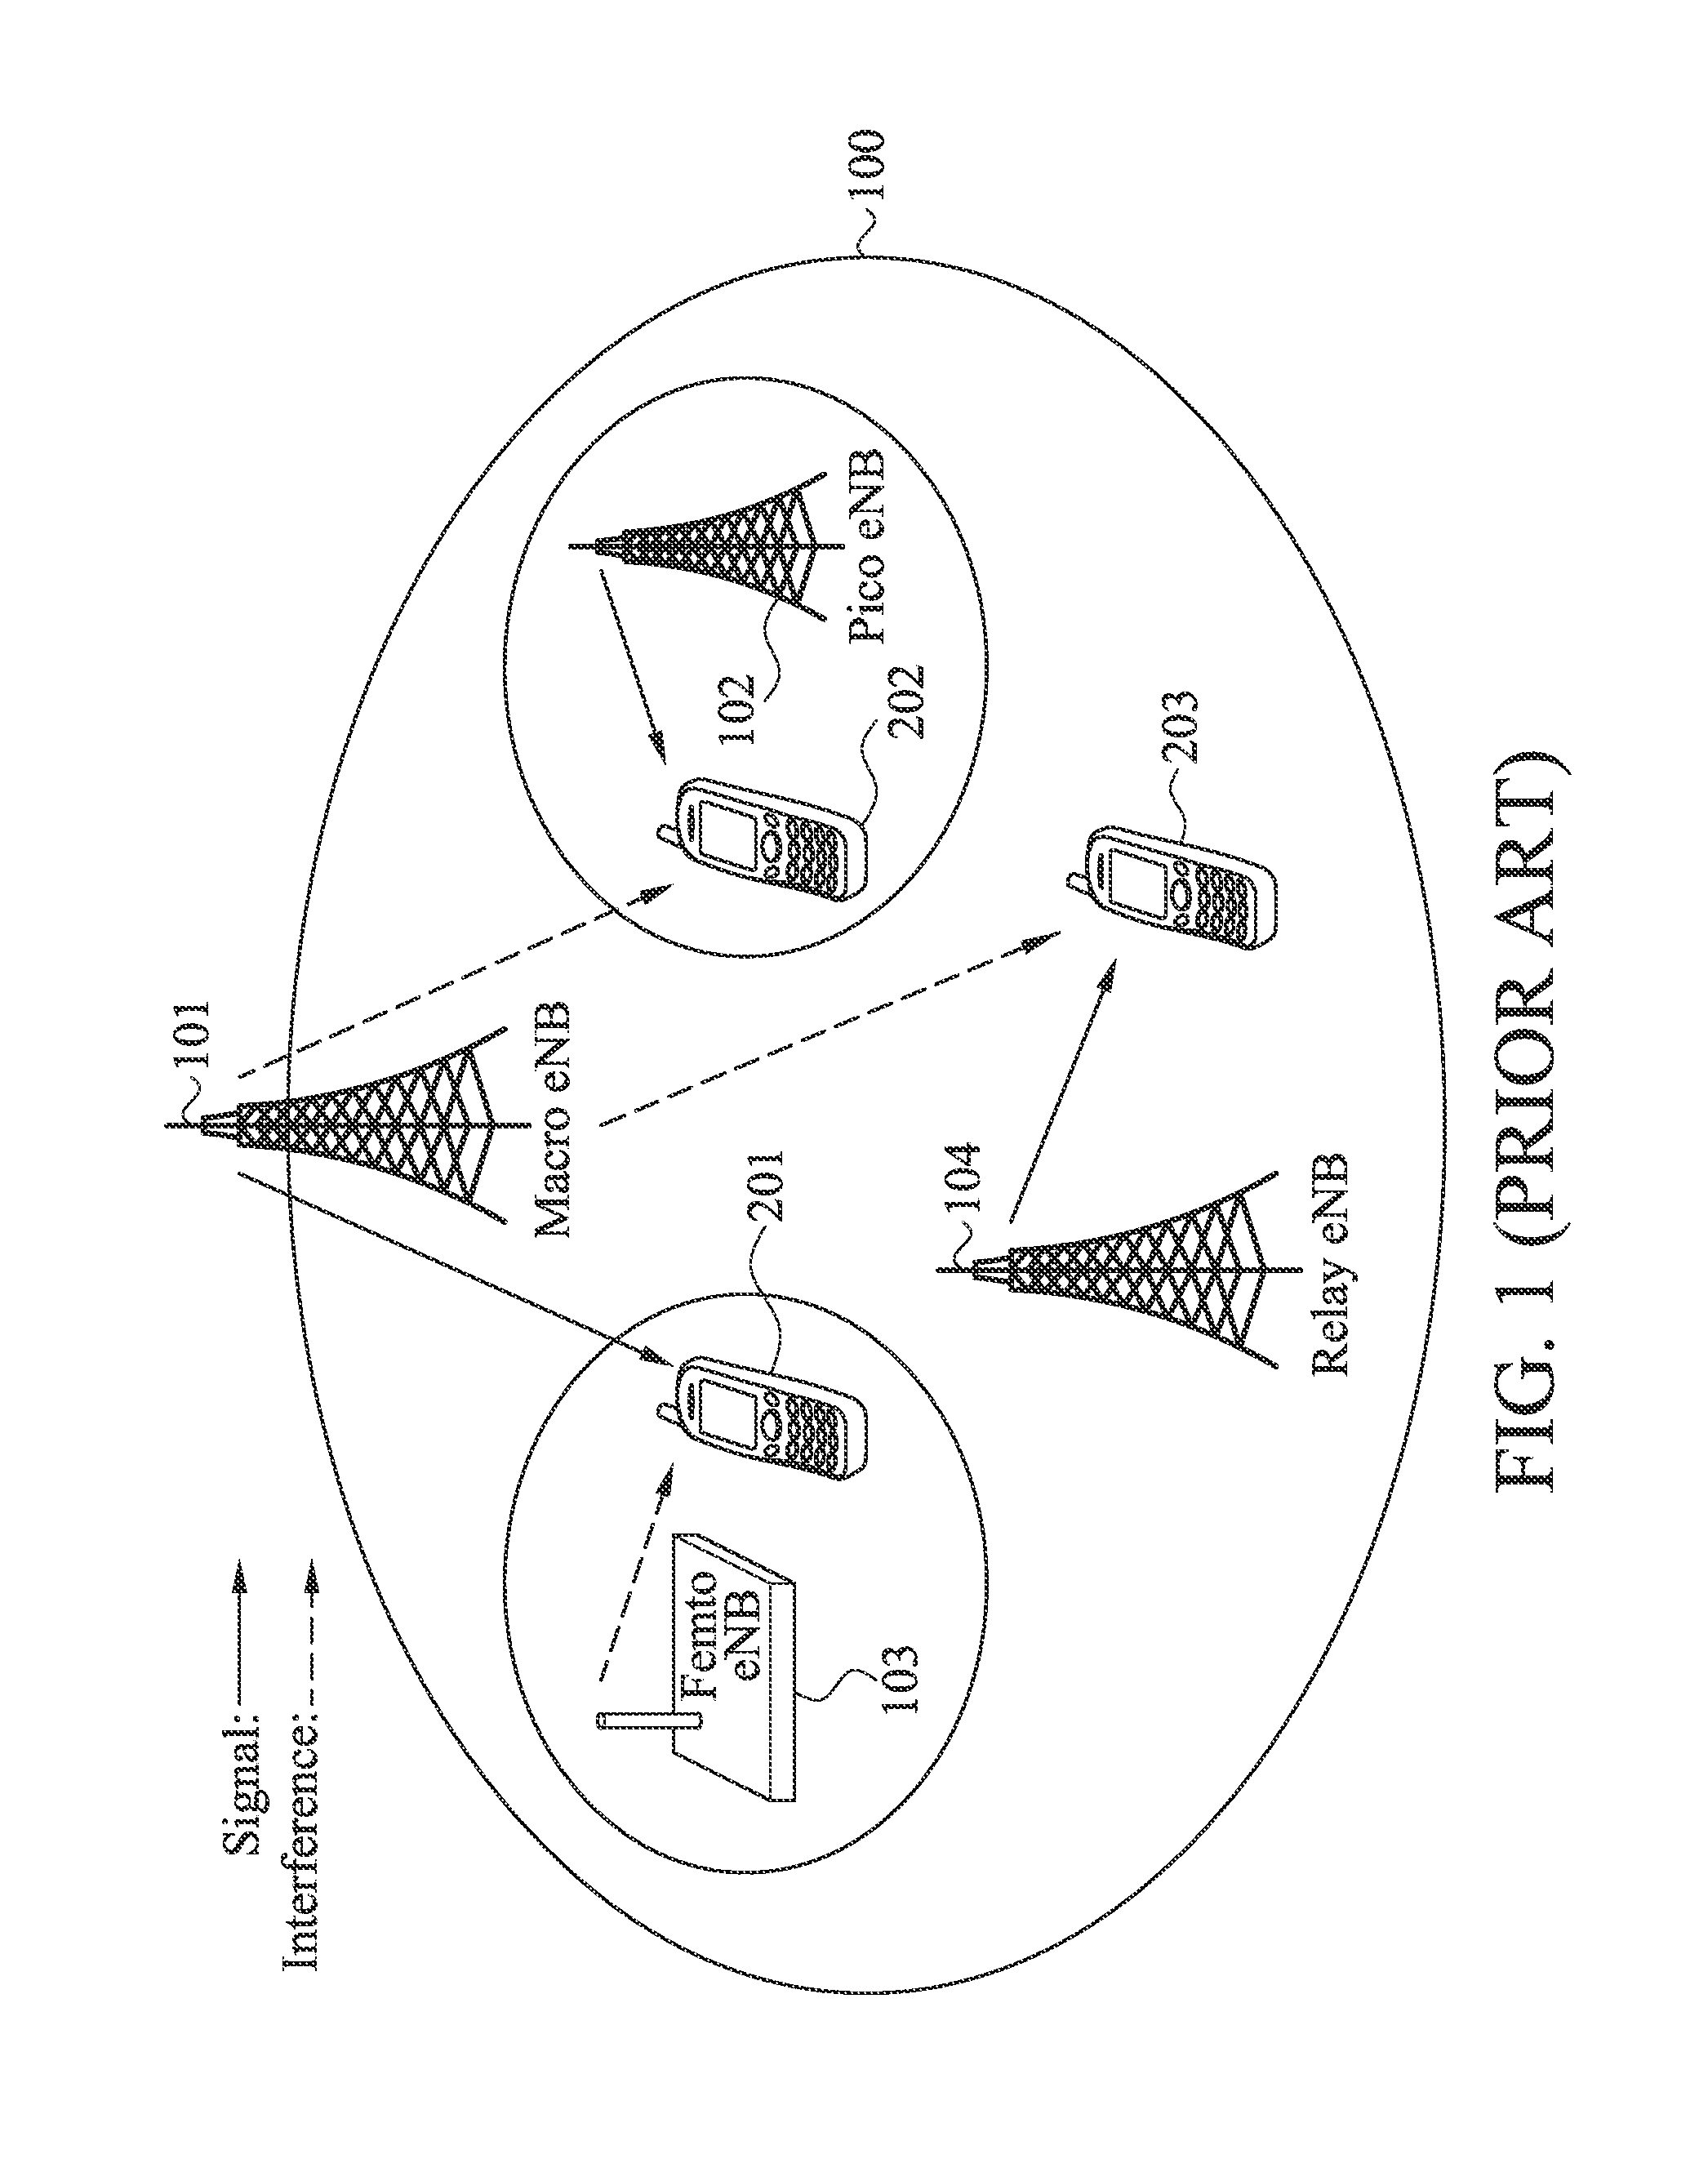 Method for Coordinating Transmissions Between Different Communications Apparatuses and Communication Sapparatuses Utilizing the Same